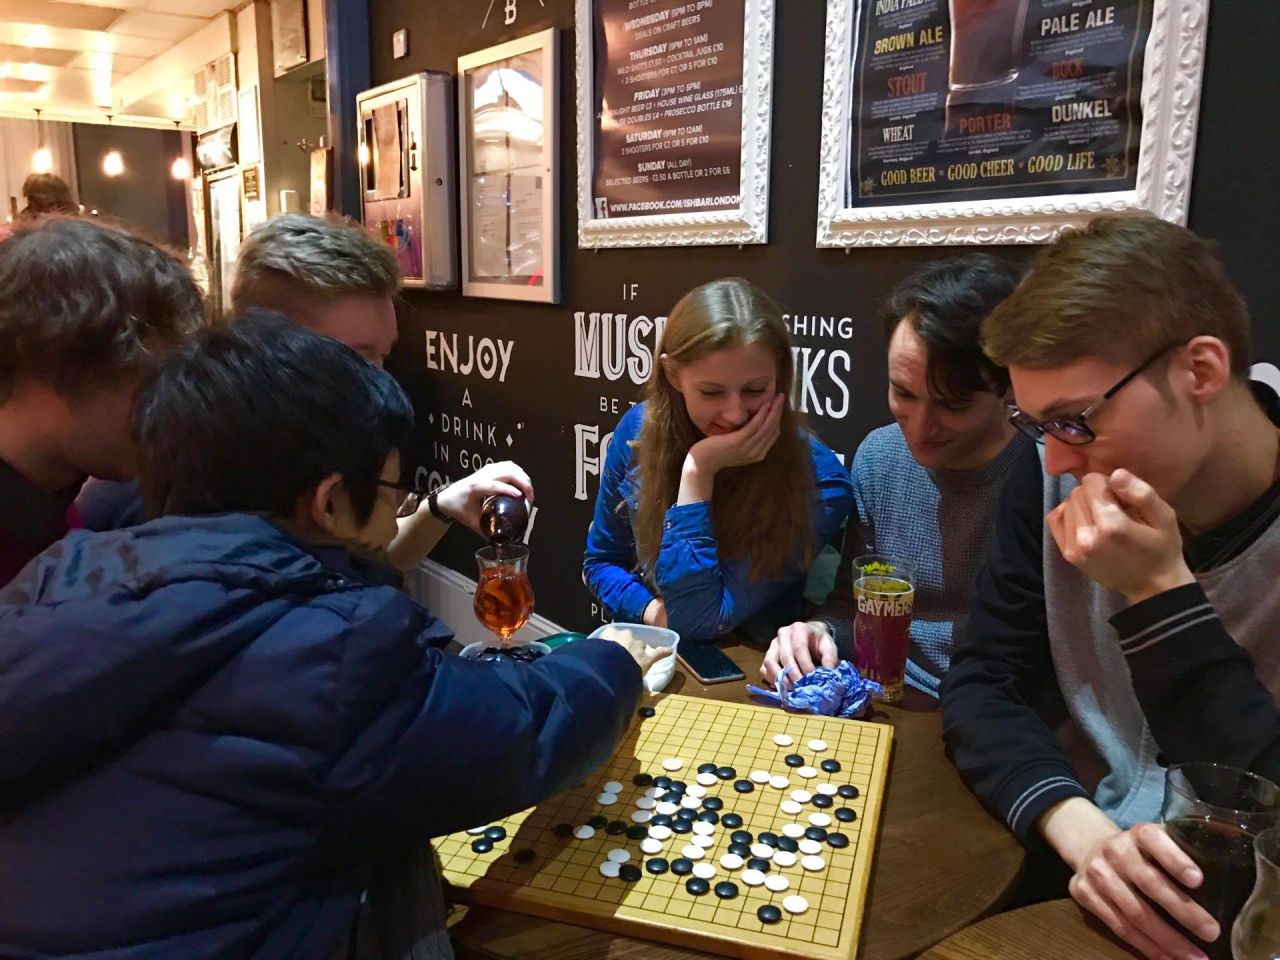 Players in the pub